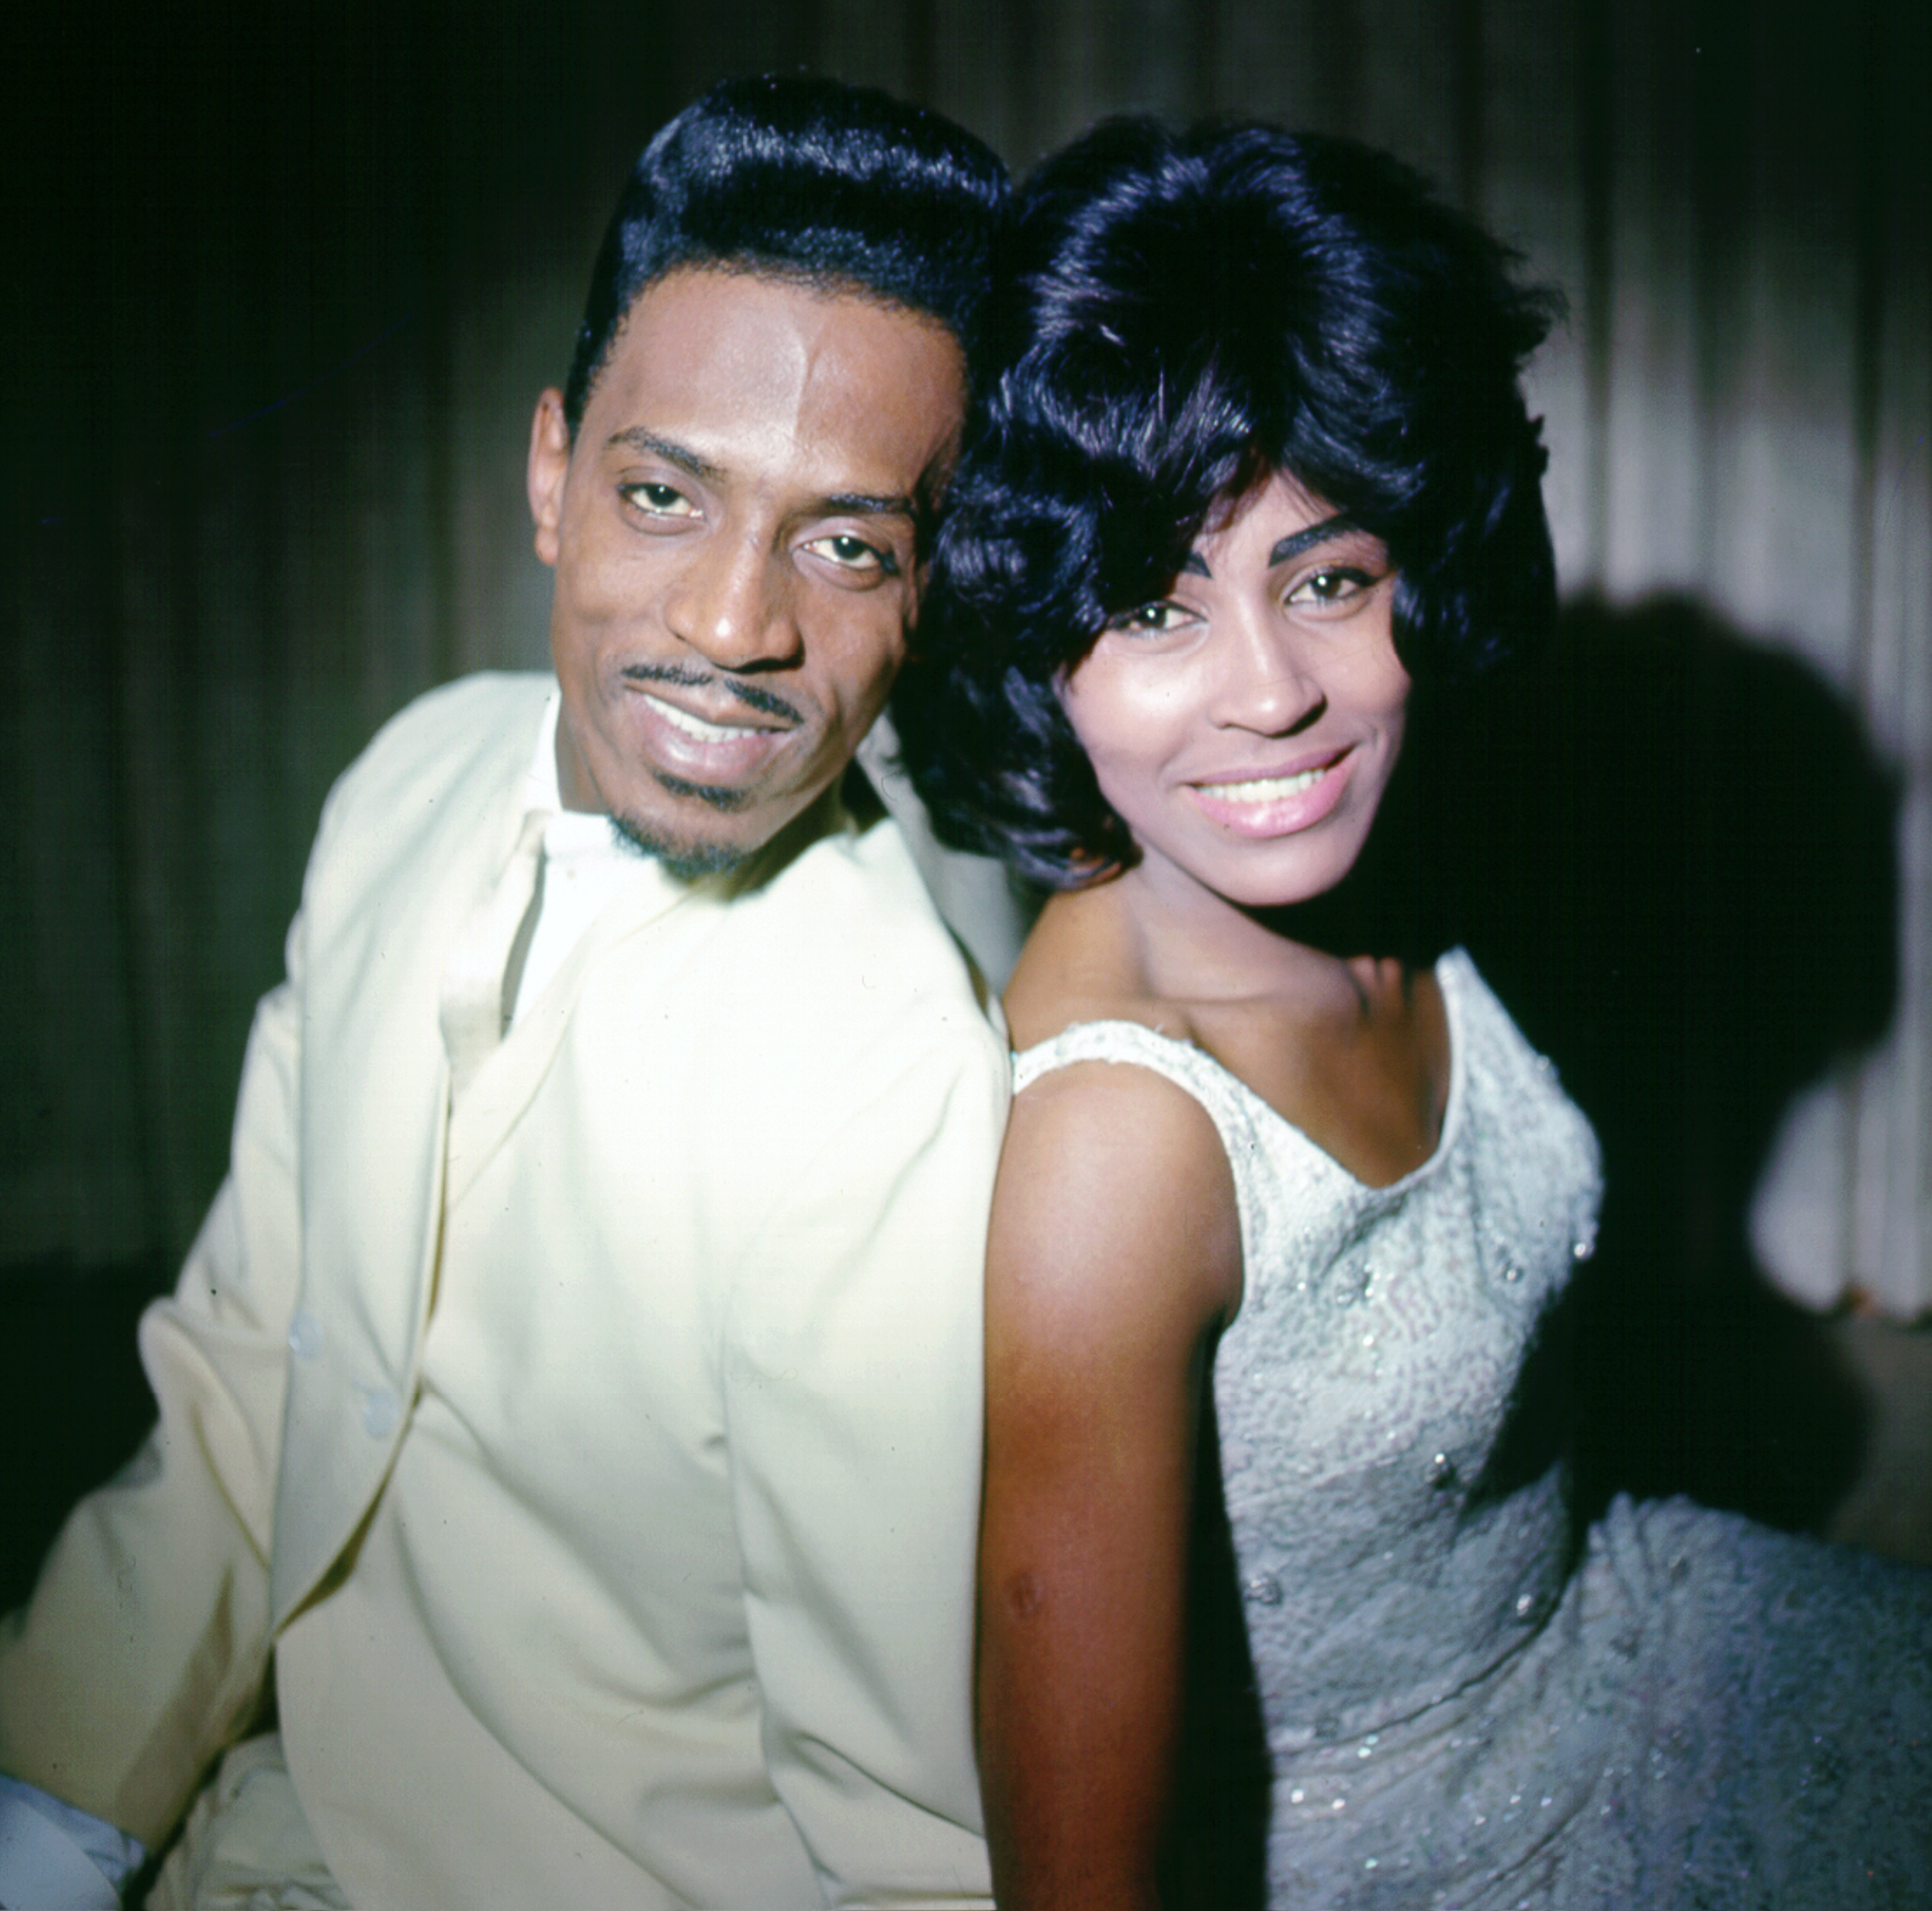 Ike Turner and Tina Turner portrait taken in 1963 | Source: Getty Images